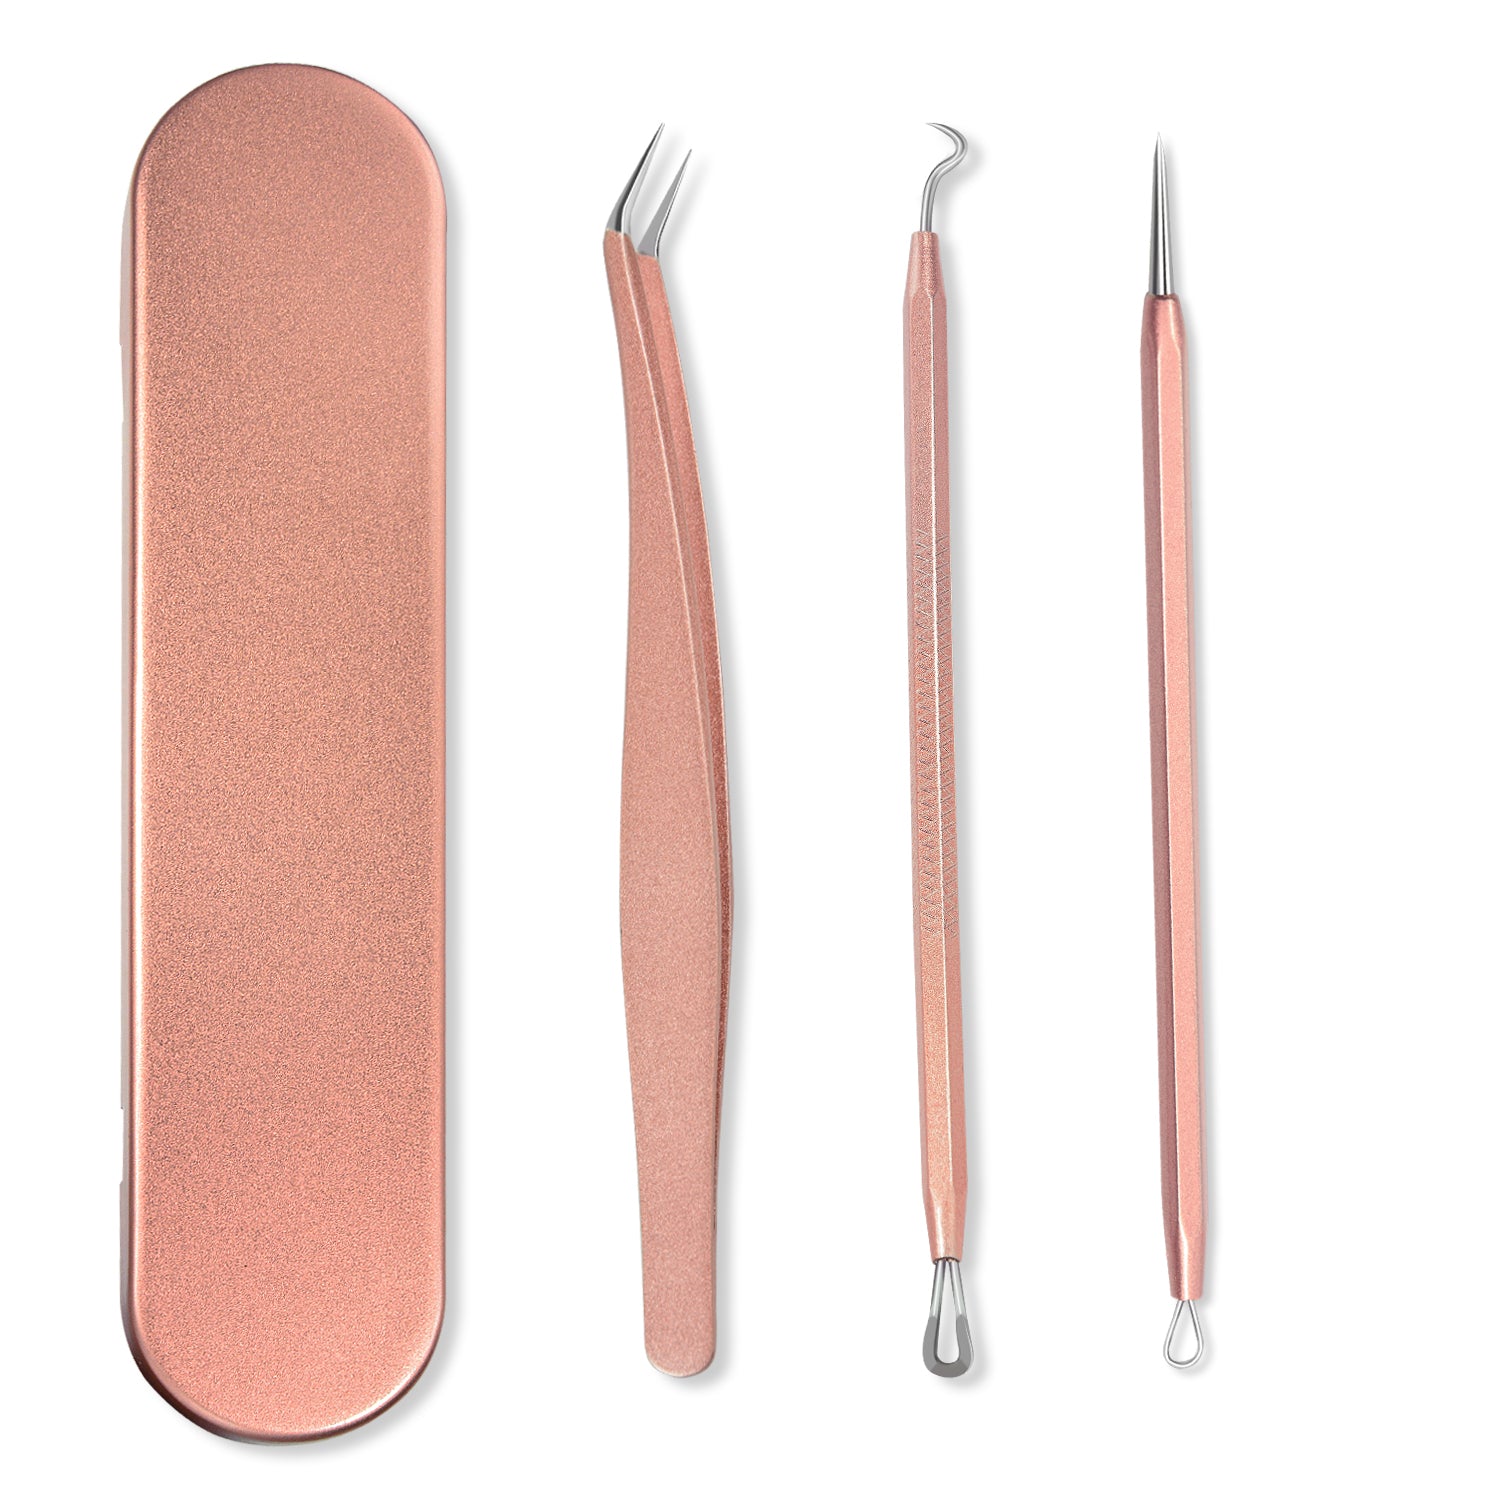 Therwen 7 Pcs Weeding Tools Set for Vinyl with LED Light Pin and Hook  Retractable Rose Gold Pen and Tweezers for Removing Tiny Vinyl Paper and  Iron on